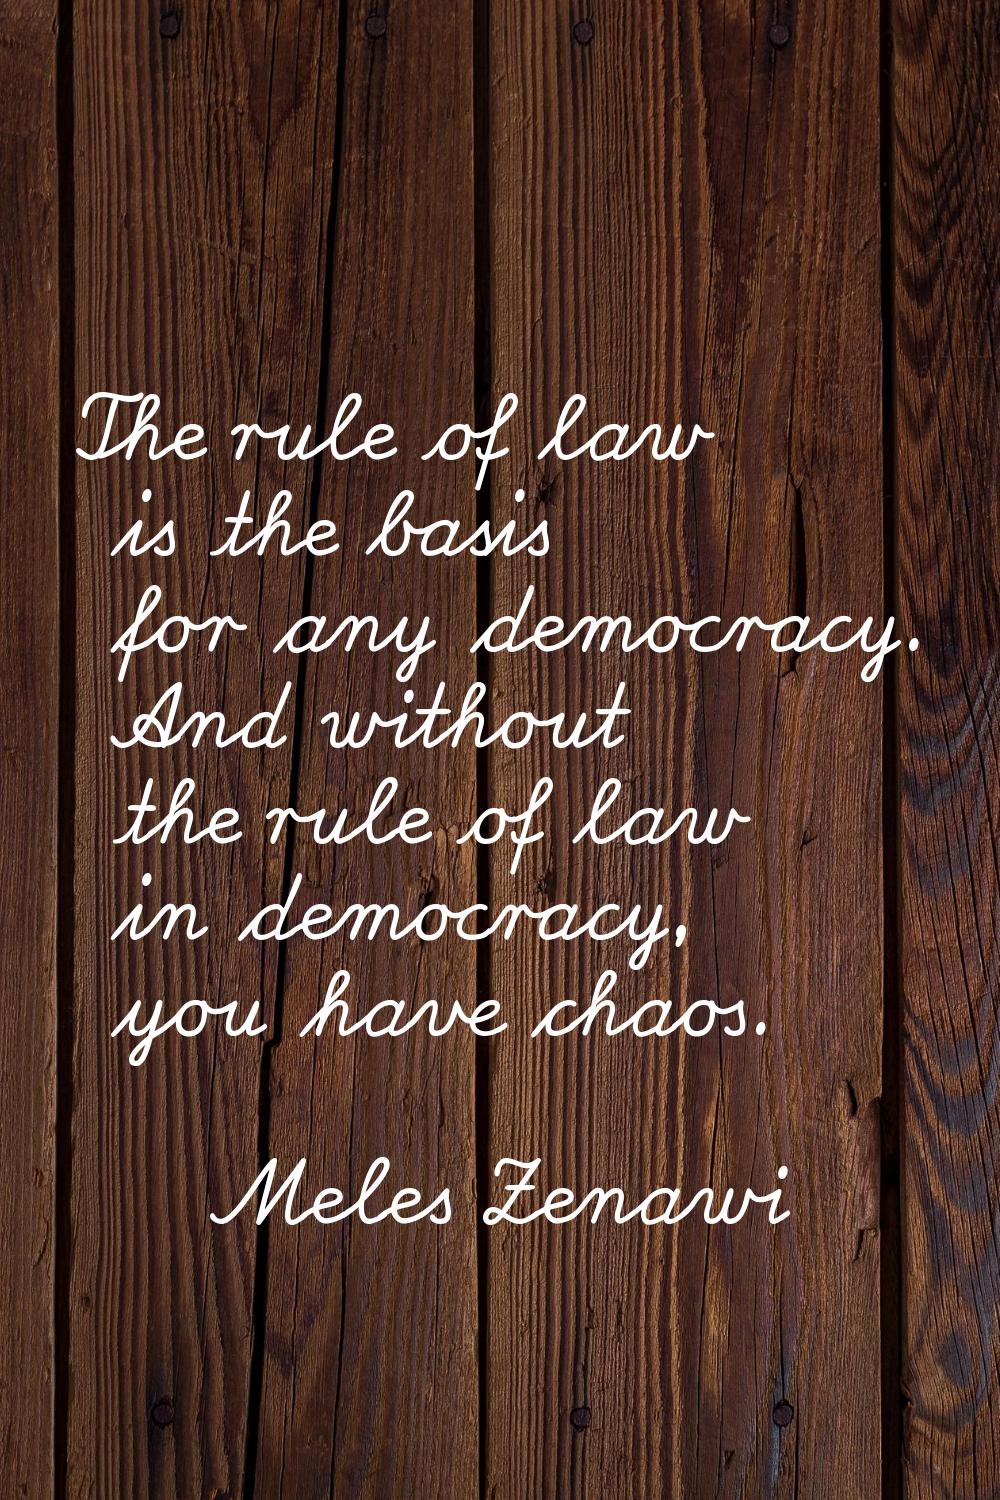 The rule of law is the basis for any democracy. And without the rule of law in democracy, you have 